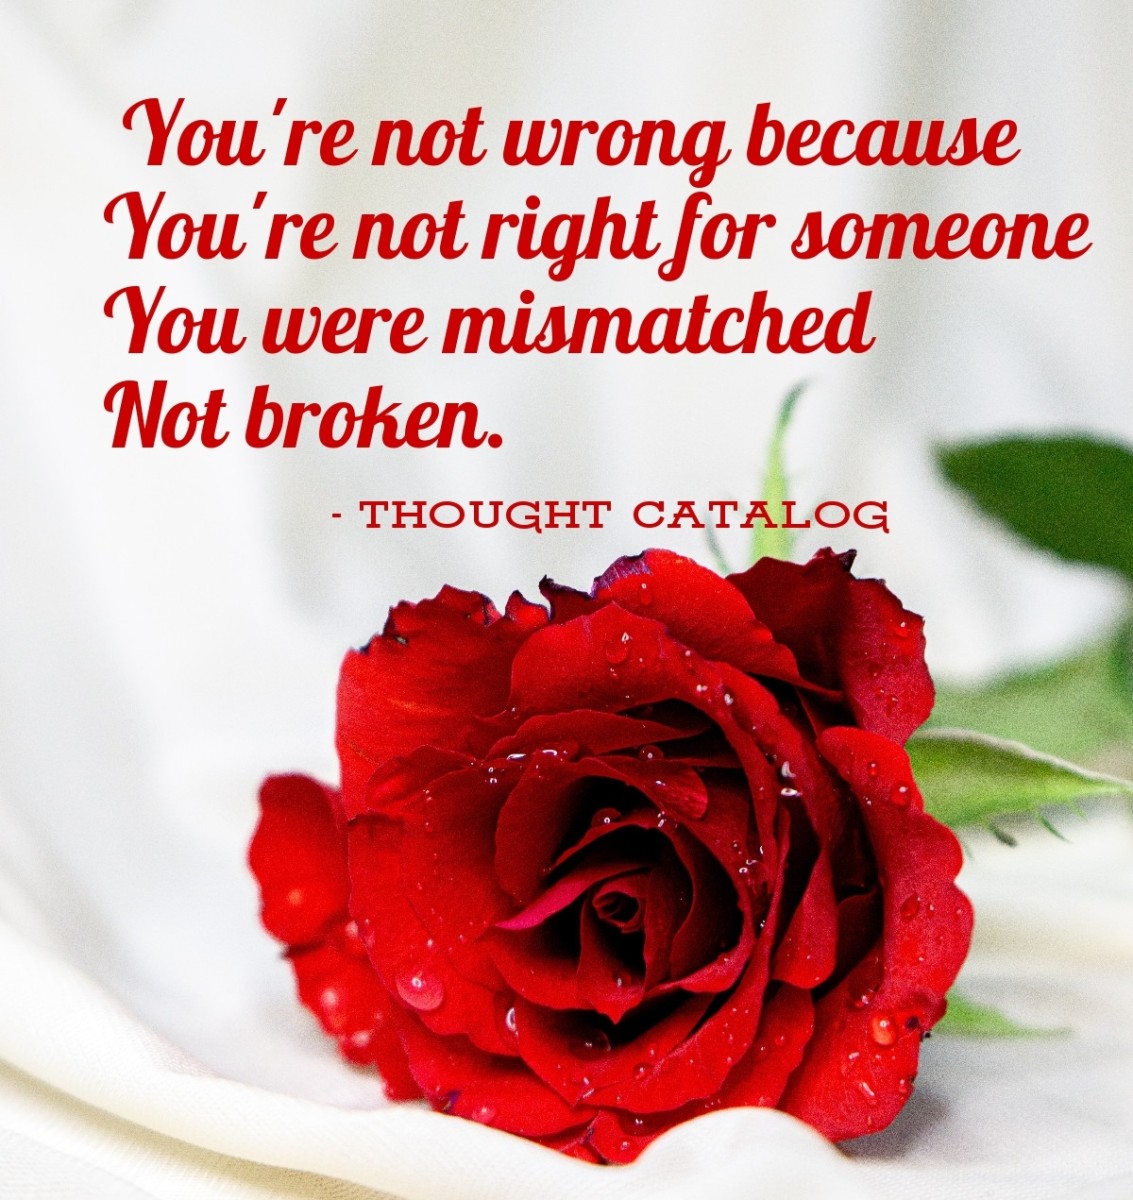 You're not wrong because you're not right for someone.